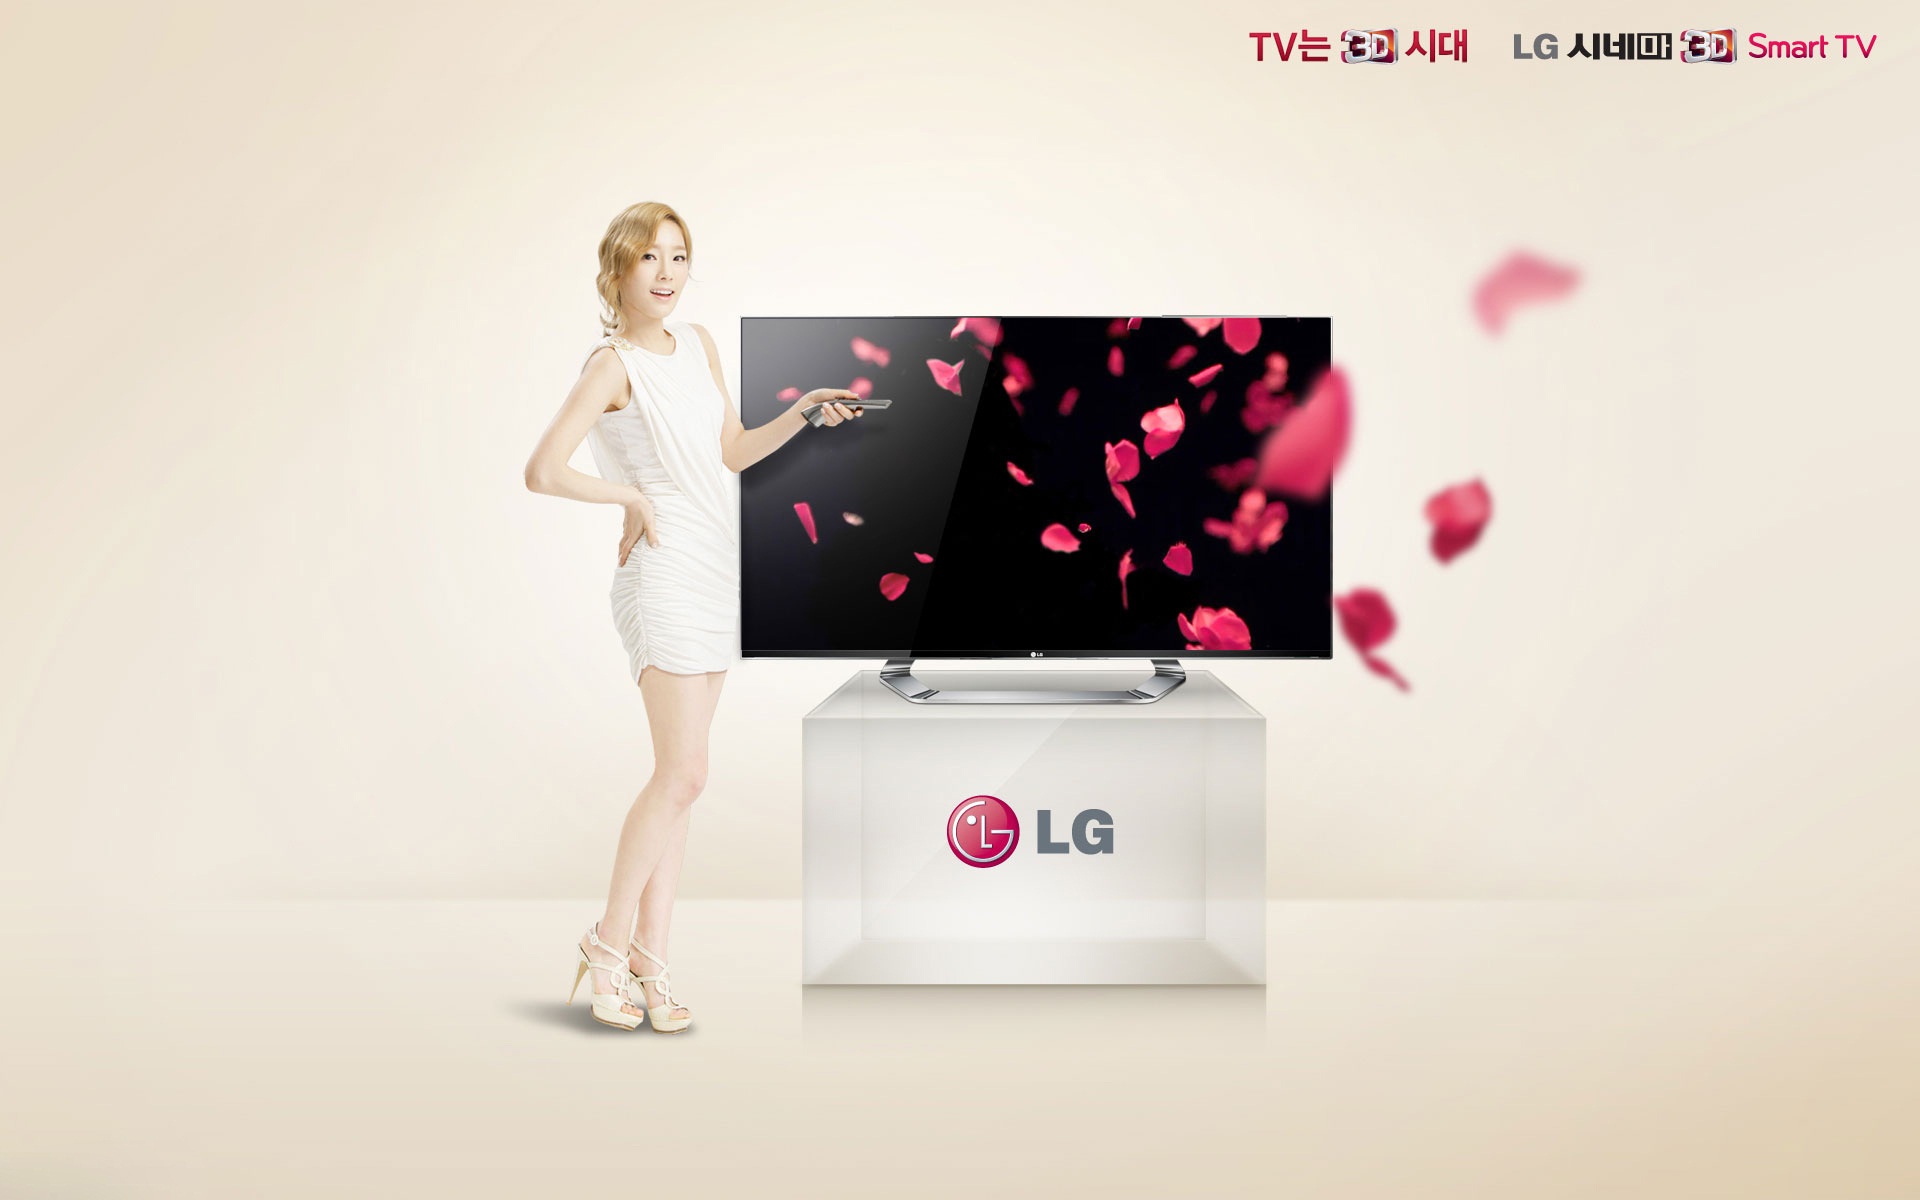 Girls Generation ACE and LG endorsements ads HD wallpapers #14 - 1920x1200